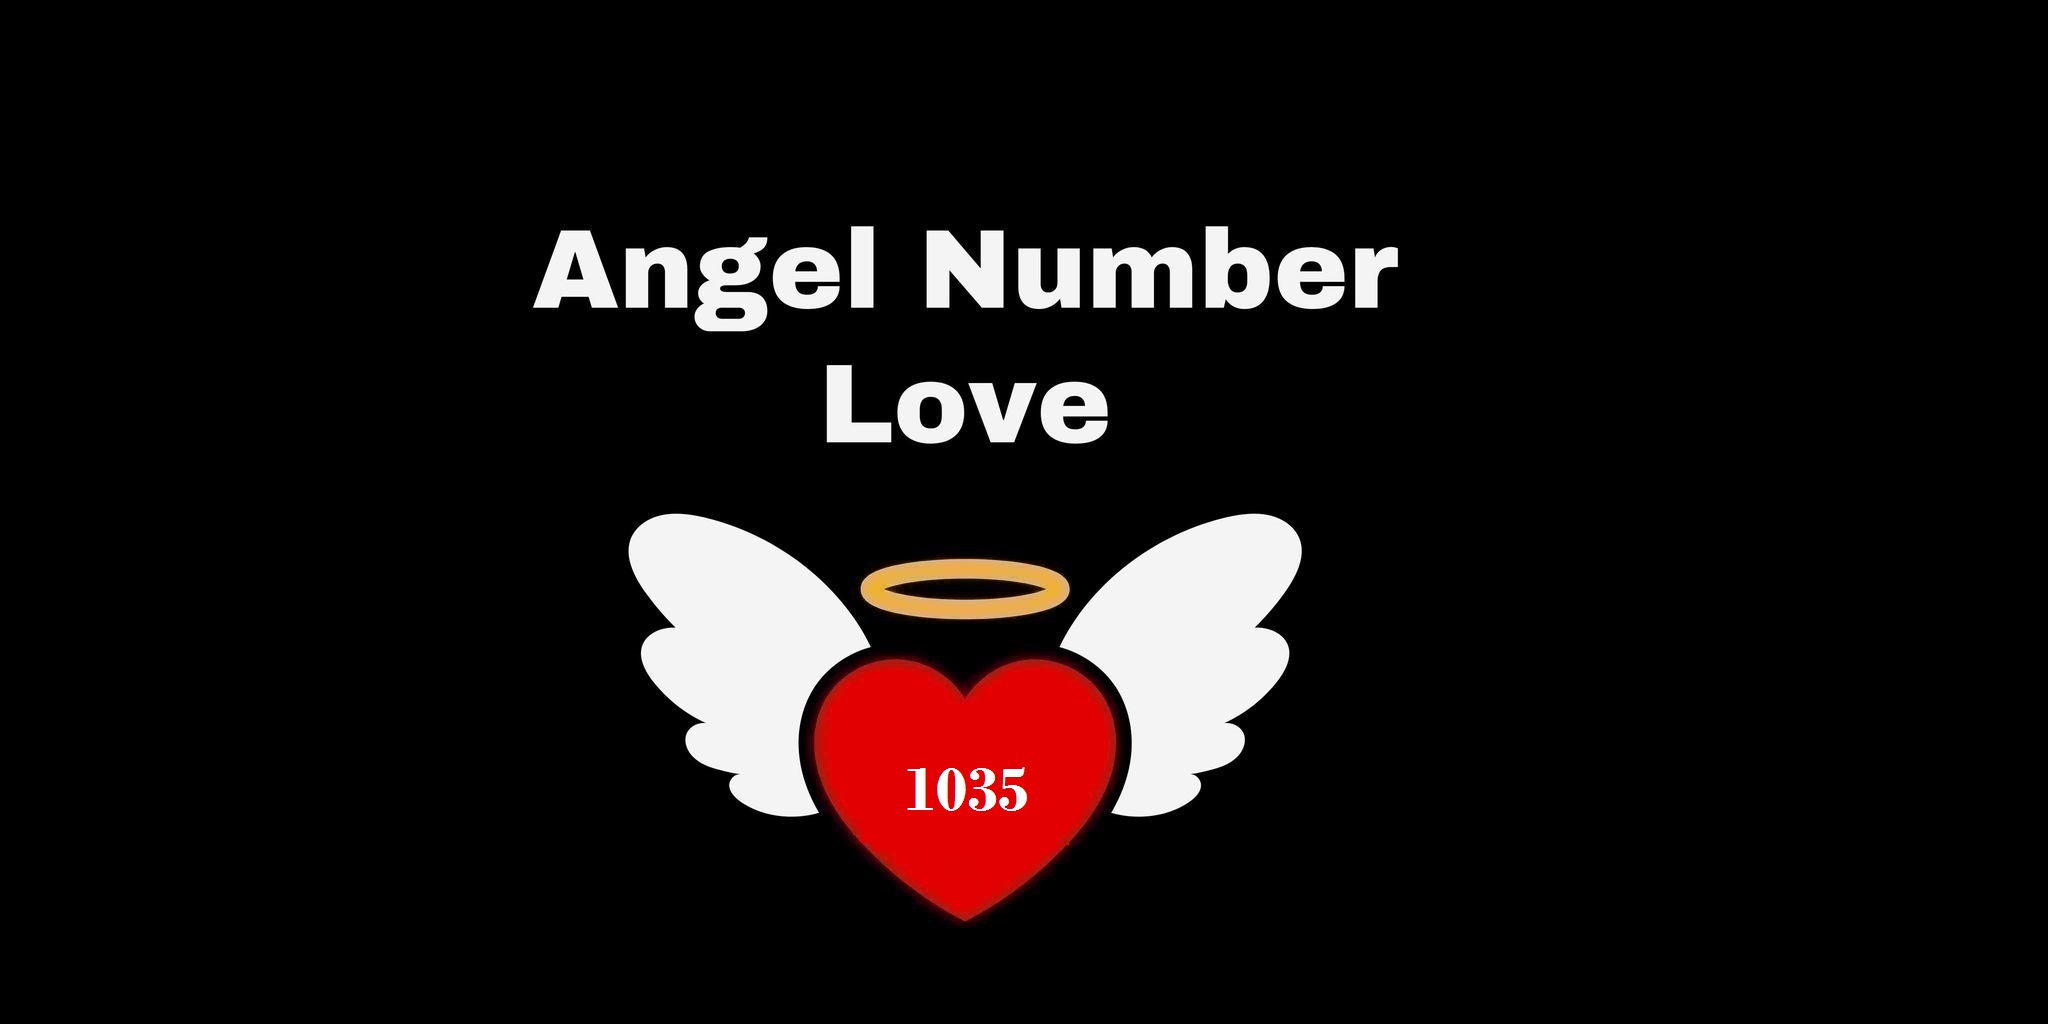 1035 Angel Number Meaning In Love